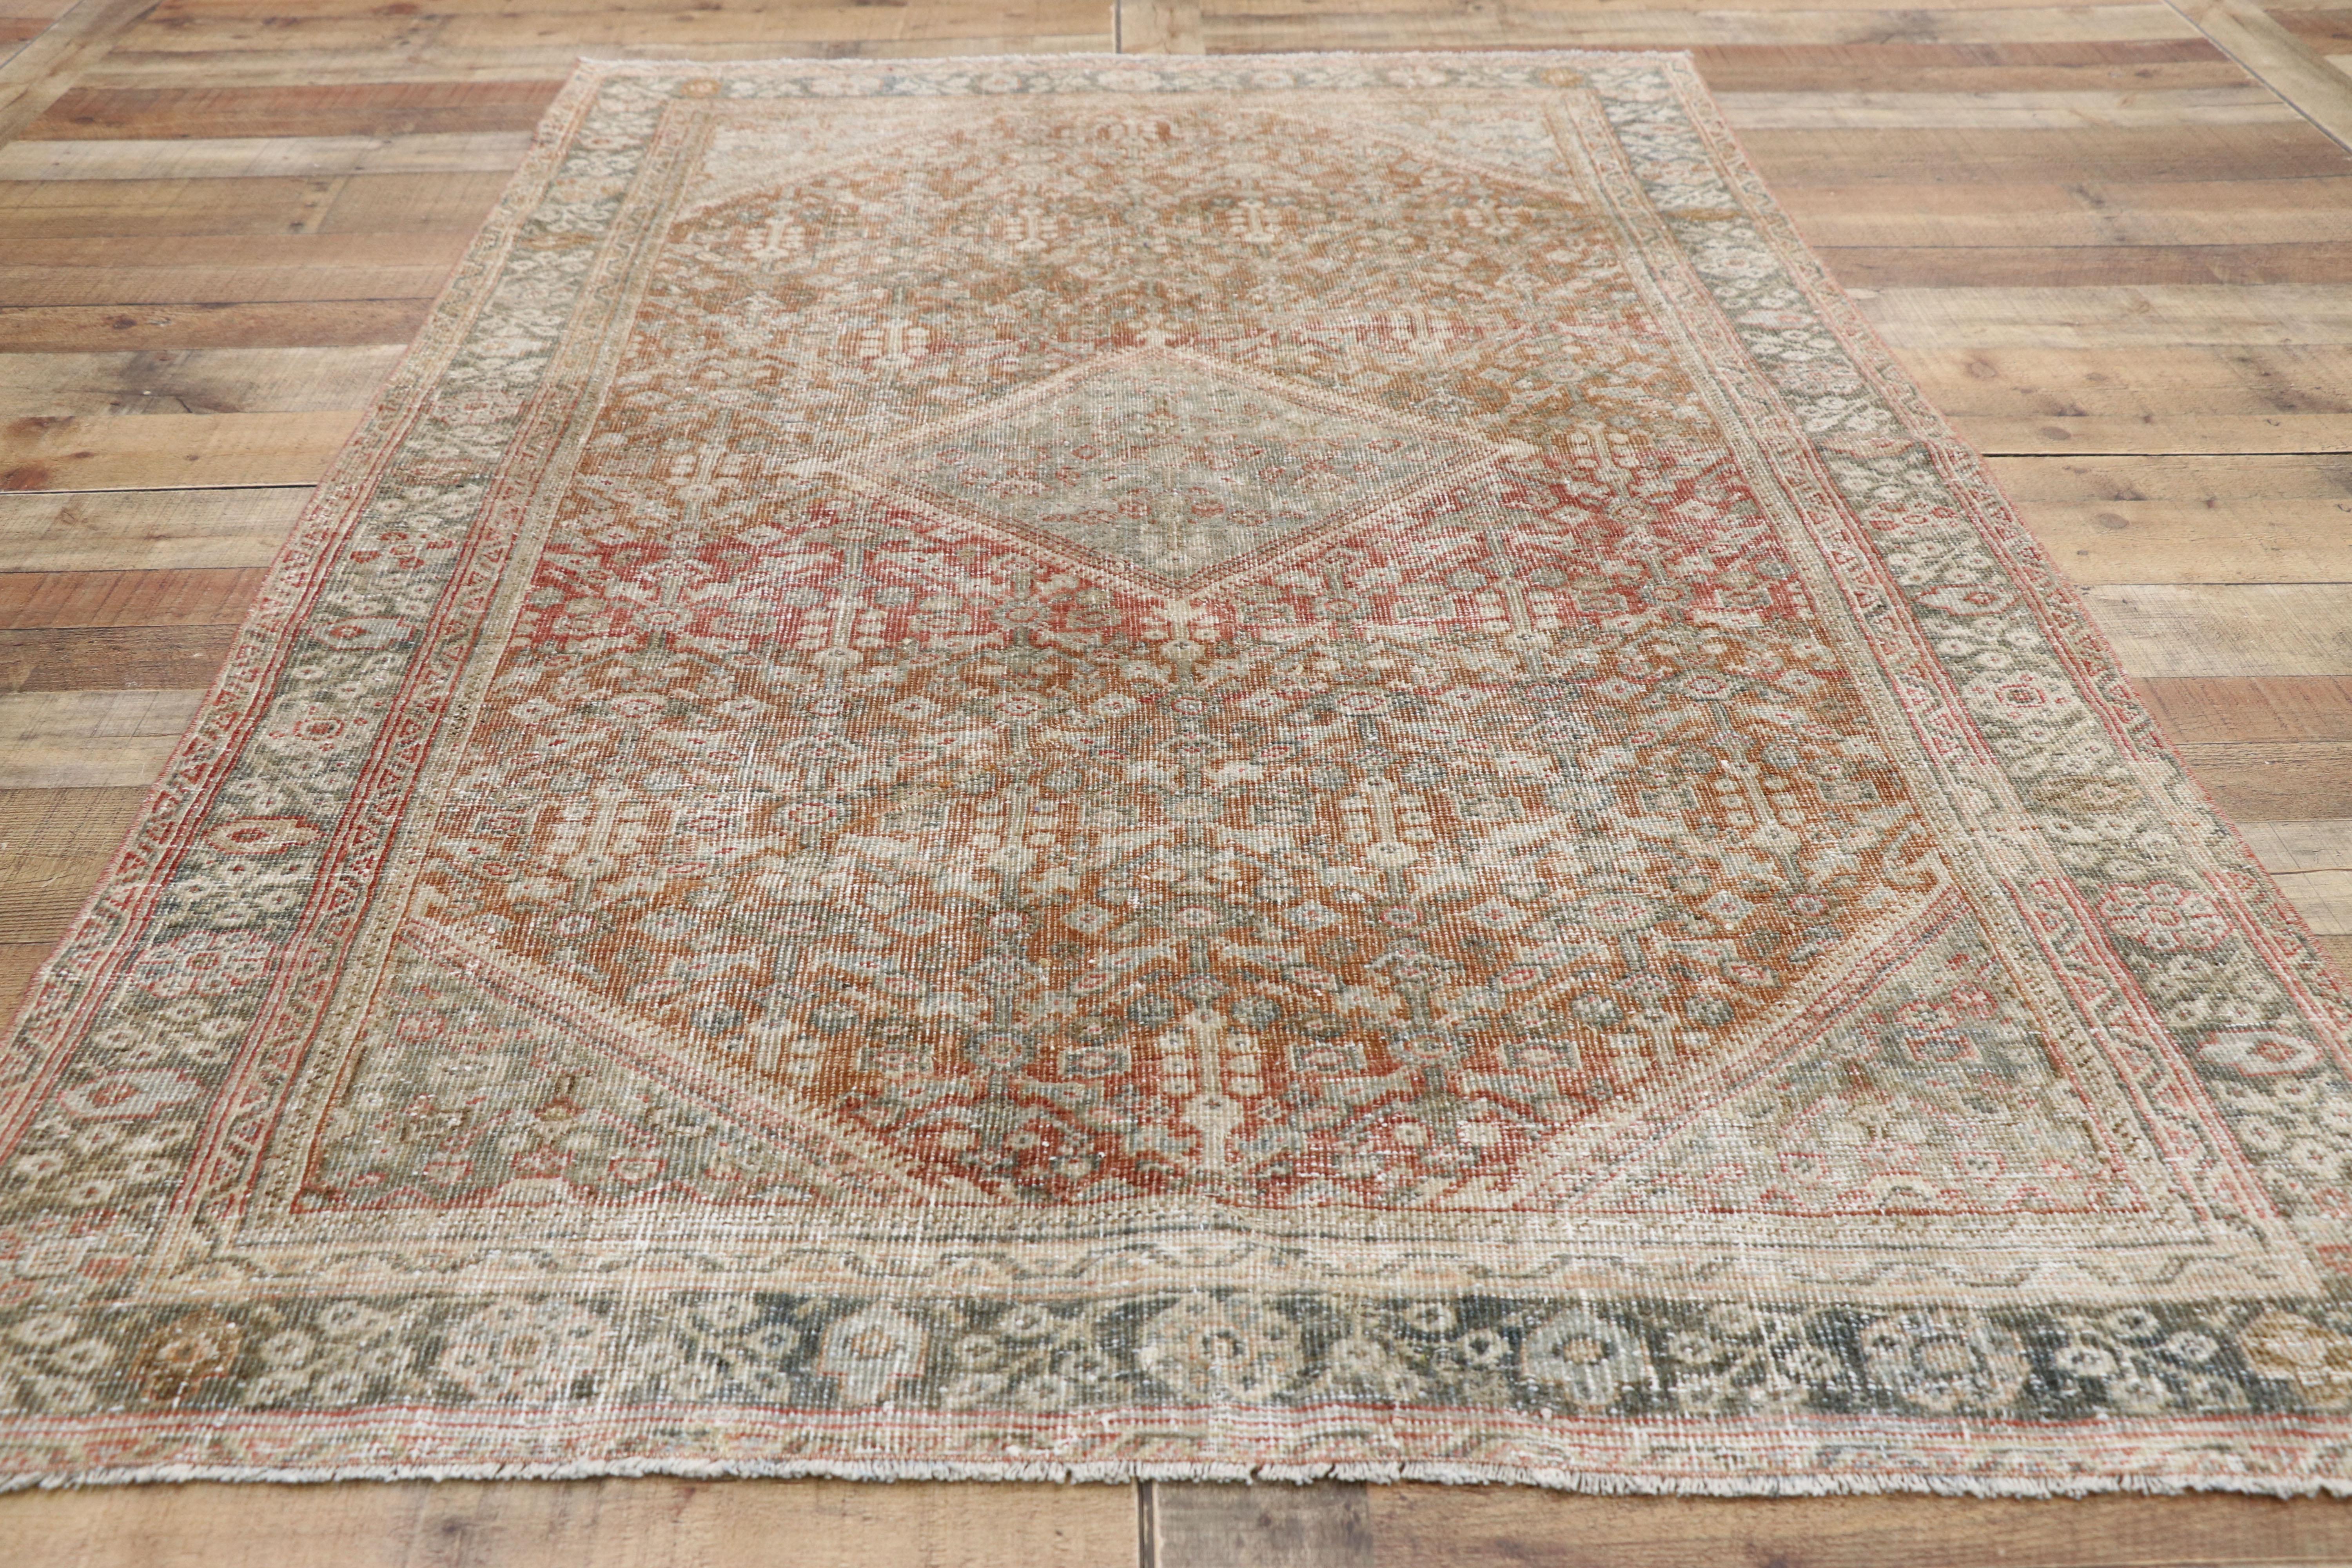 Wool Distressed Antique Persian Mahal Design Rug with Modern Rustic Belgian Style